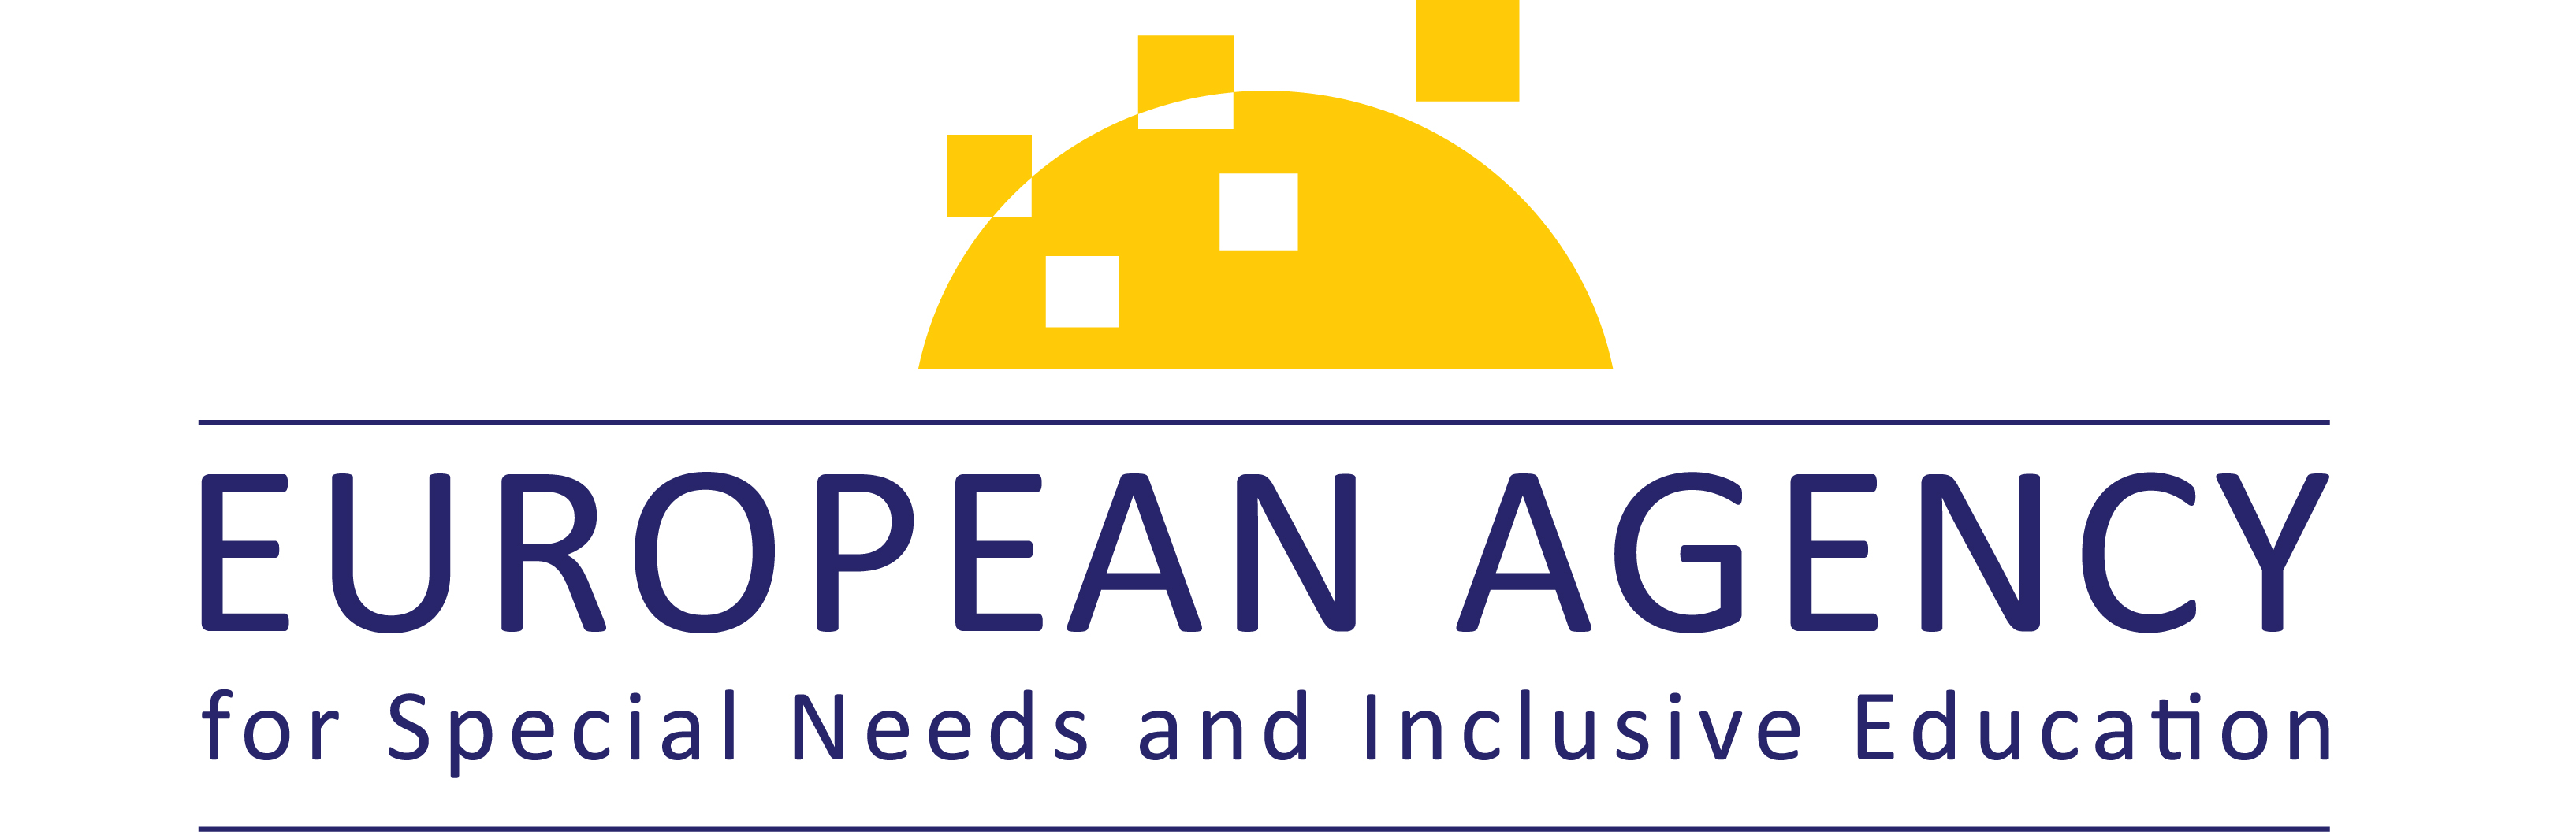 logo of the European Agency for Special Needs and Inclusive Education